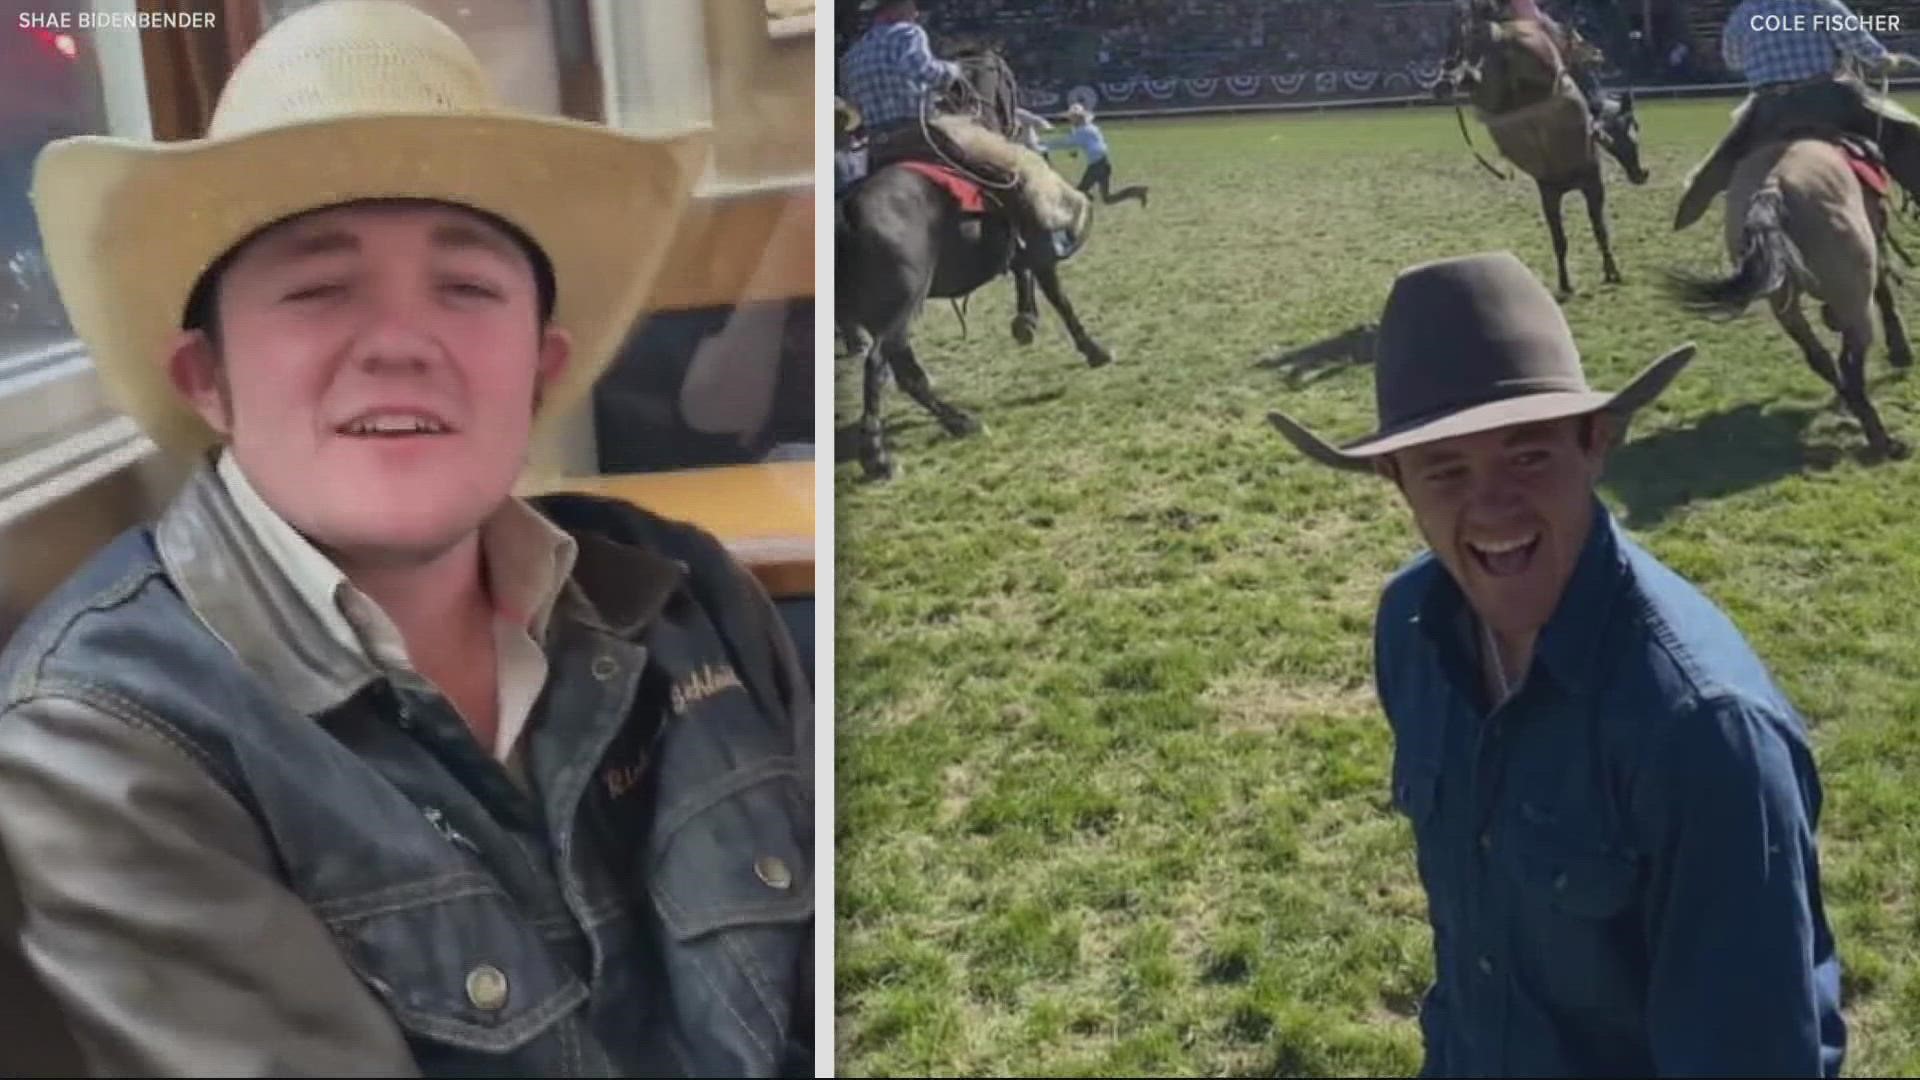 Richard Schleicher of Kansas was a passenger in a car that crashed near Pendleton on Thursday. He was in Oregon competing in the Pendleton Round-Up